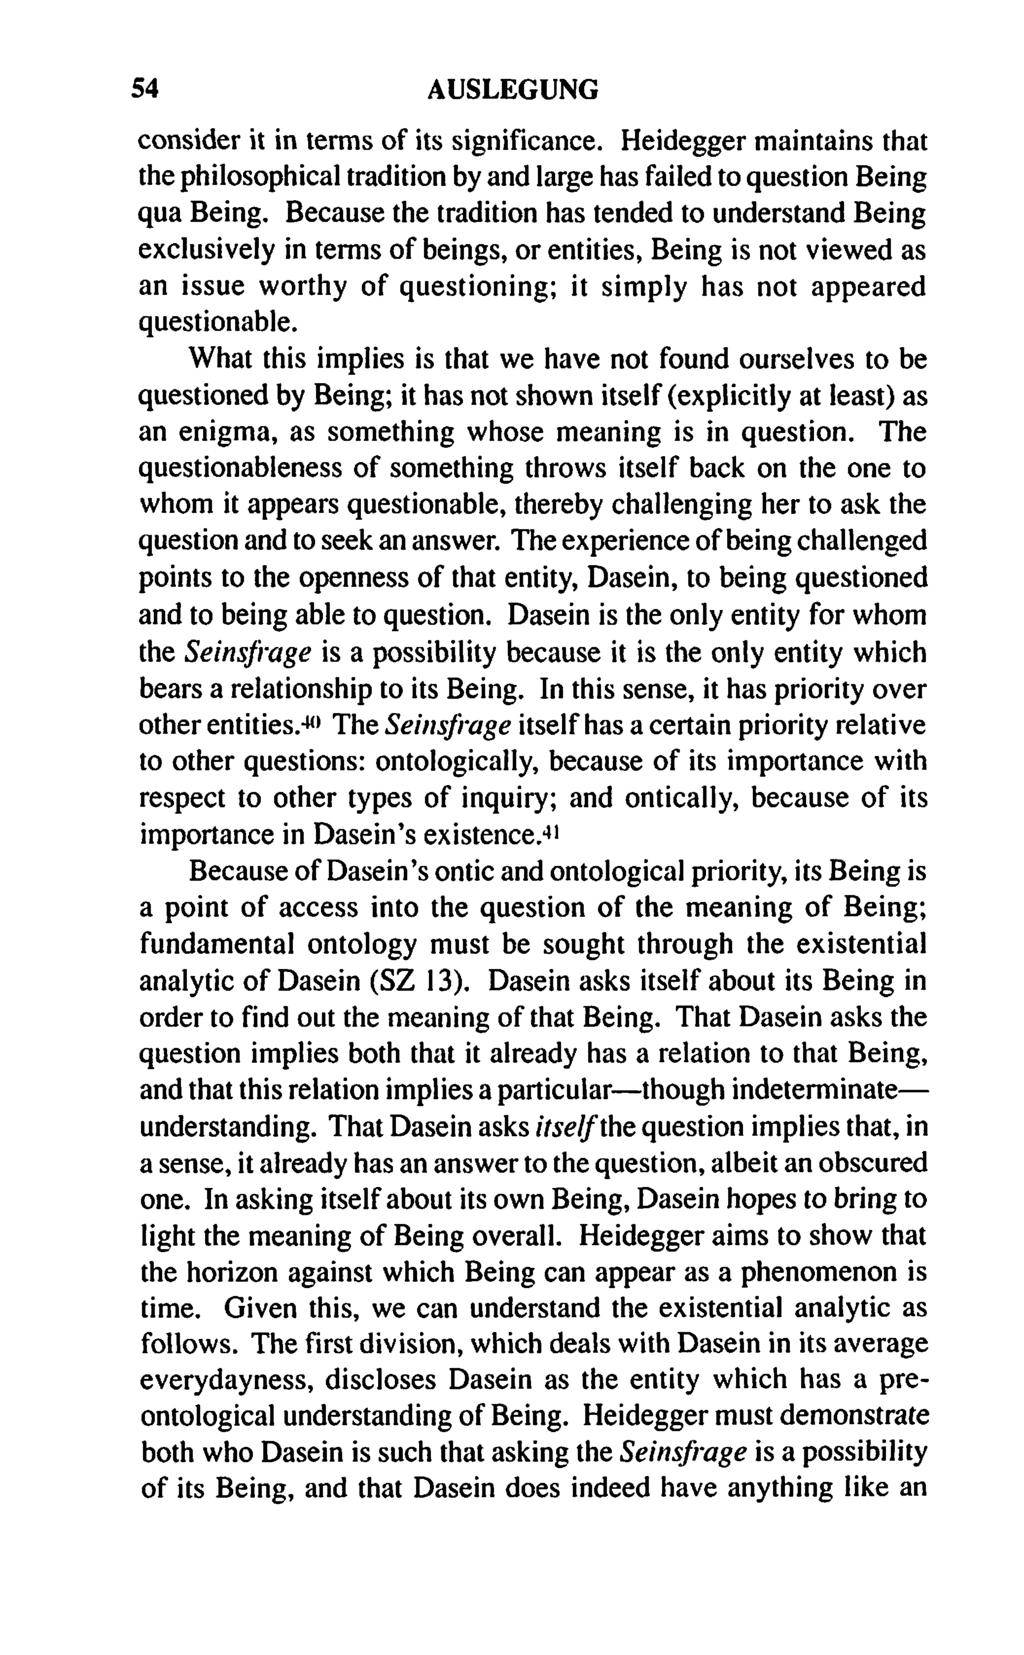 54 AUSLEGUNG consider it in terms of its significance. Heidegger maintains that the philosophical tradition by and large has failed to question Being qua Being.